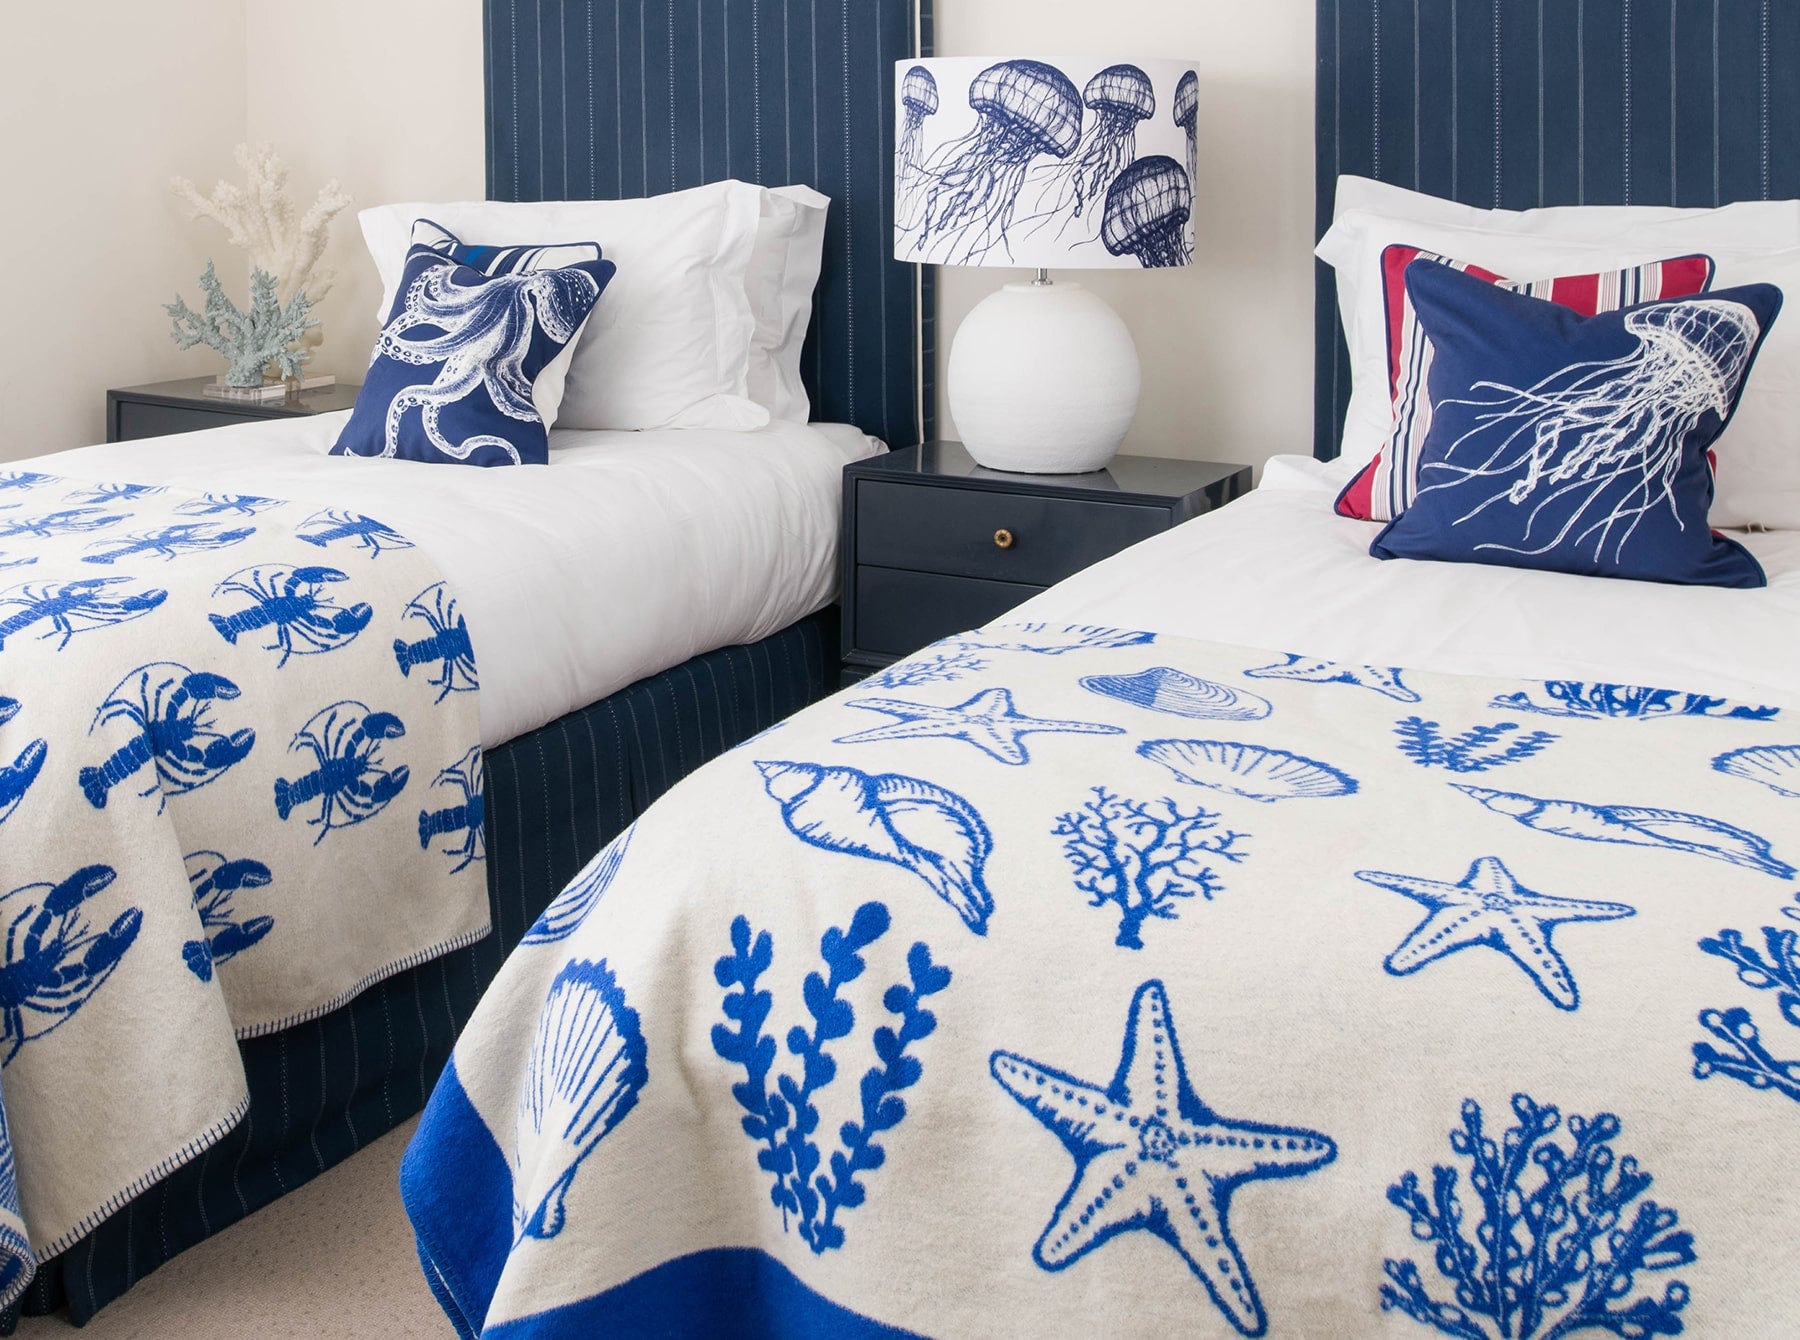 Our Classic Navy jellyfish design on a white background on a white lampbase on a side table between two single beds.On the beds are classic Navy and White cushions and our reversible throws are draped over the ends of the beds.